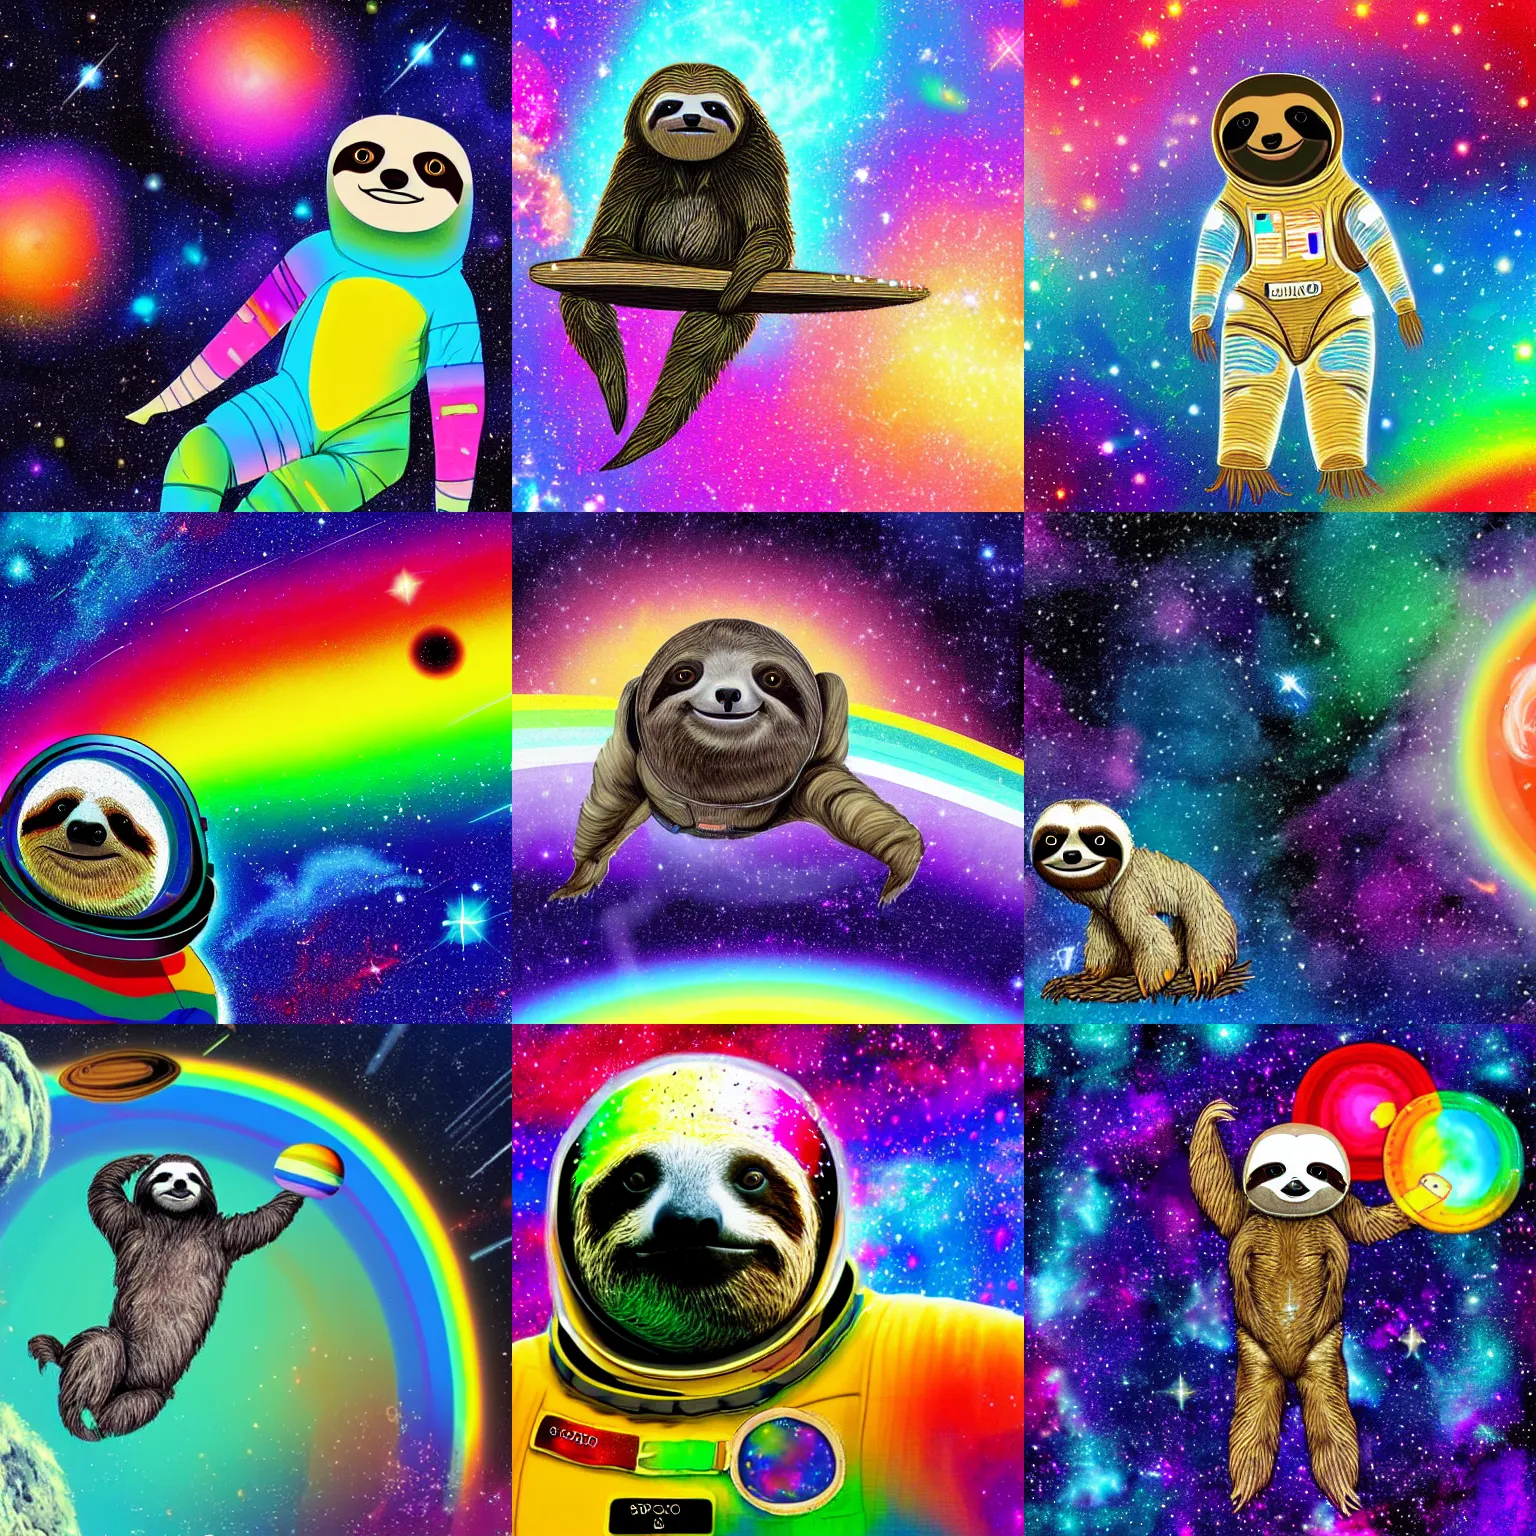 Prompt: digital art of a sloth wearing a space suit floating in space, with colorful rainbow galaxies in the background